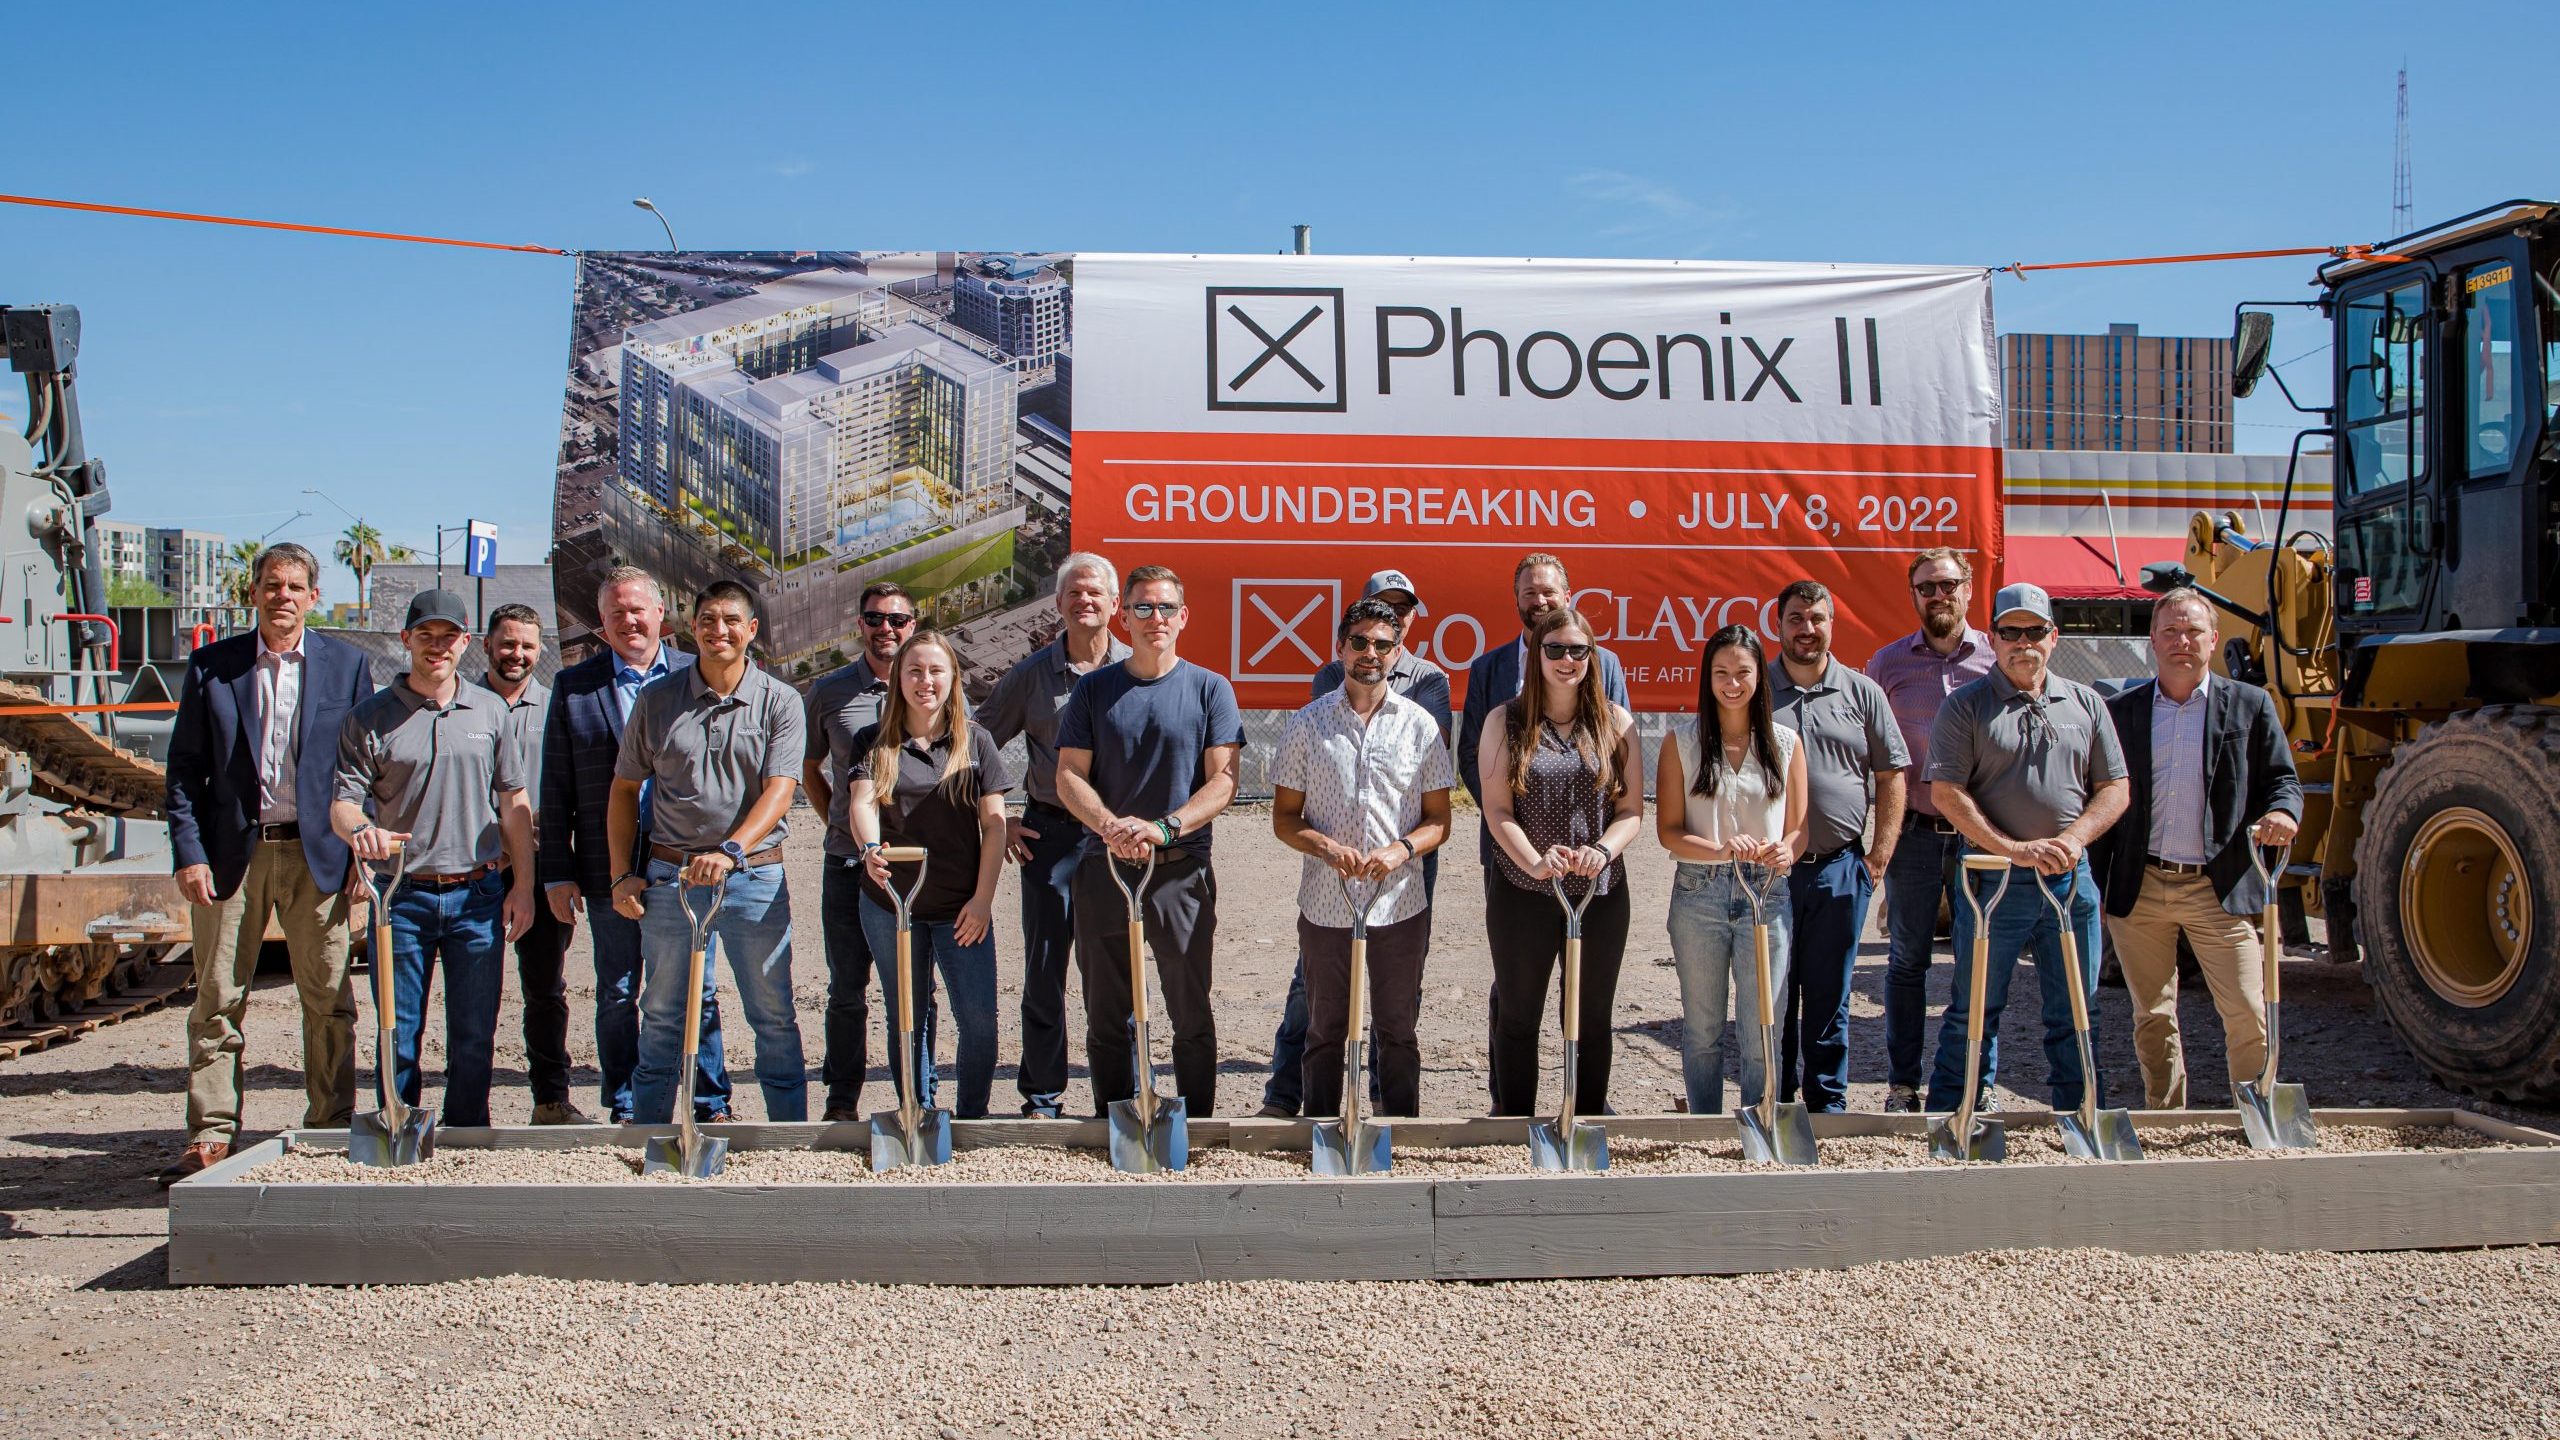 Ground broken on 26-story residential high-rise in downtown Phoenix